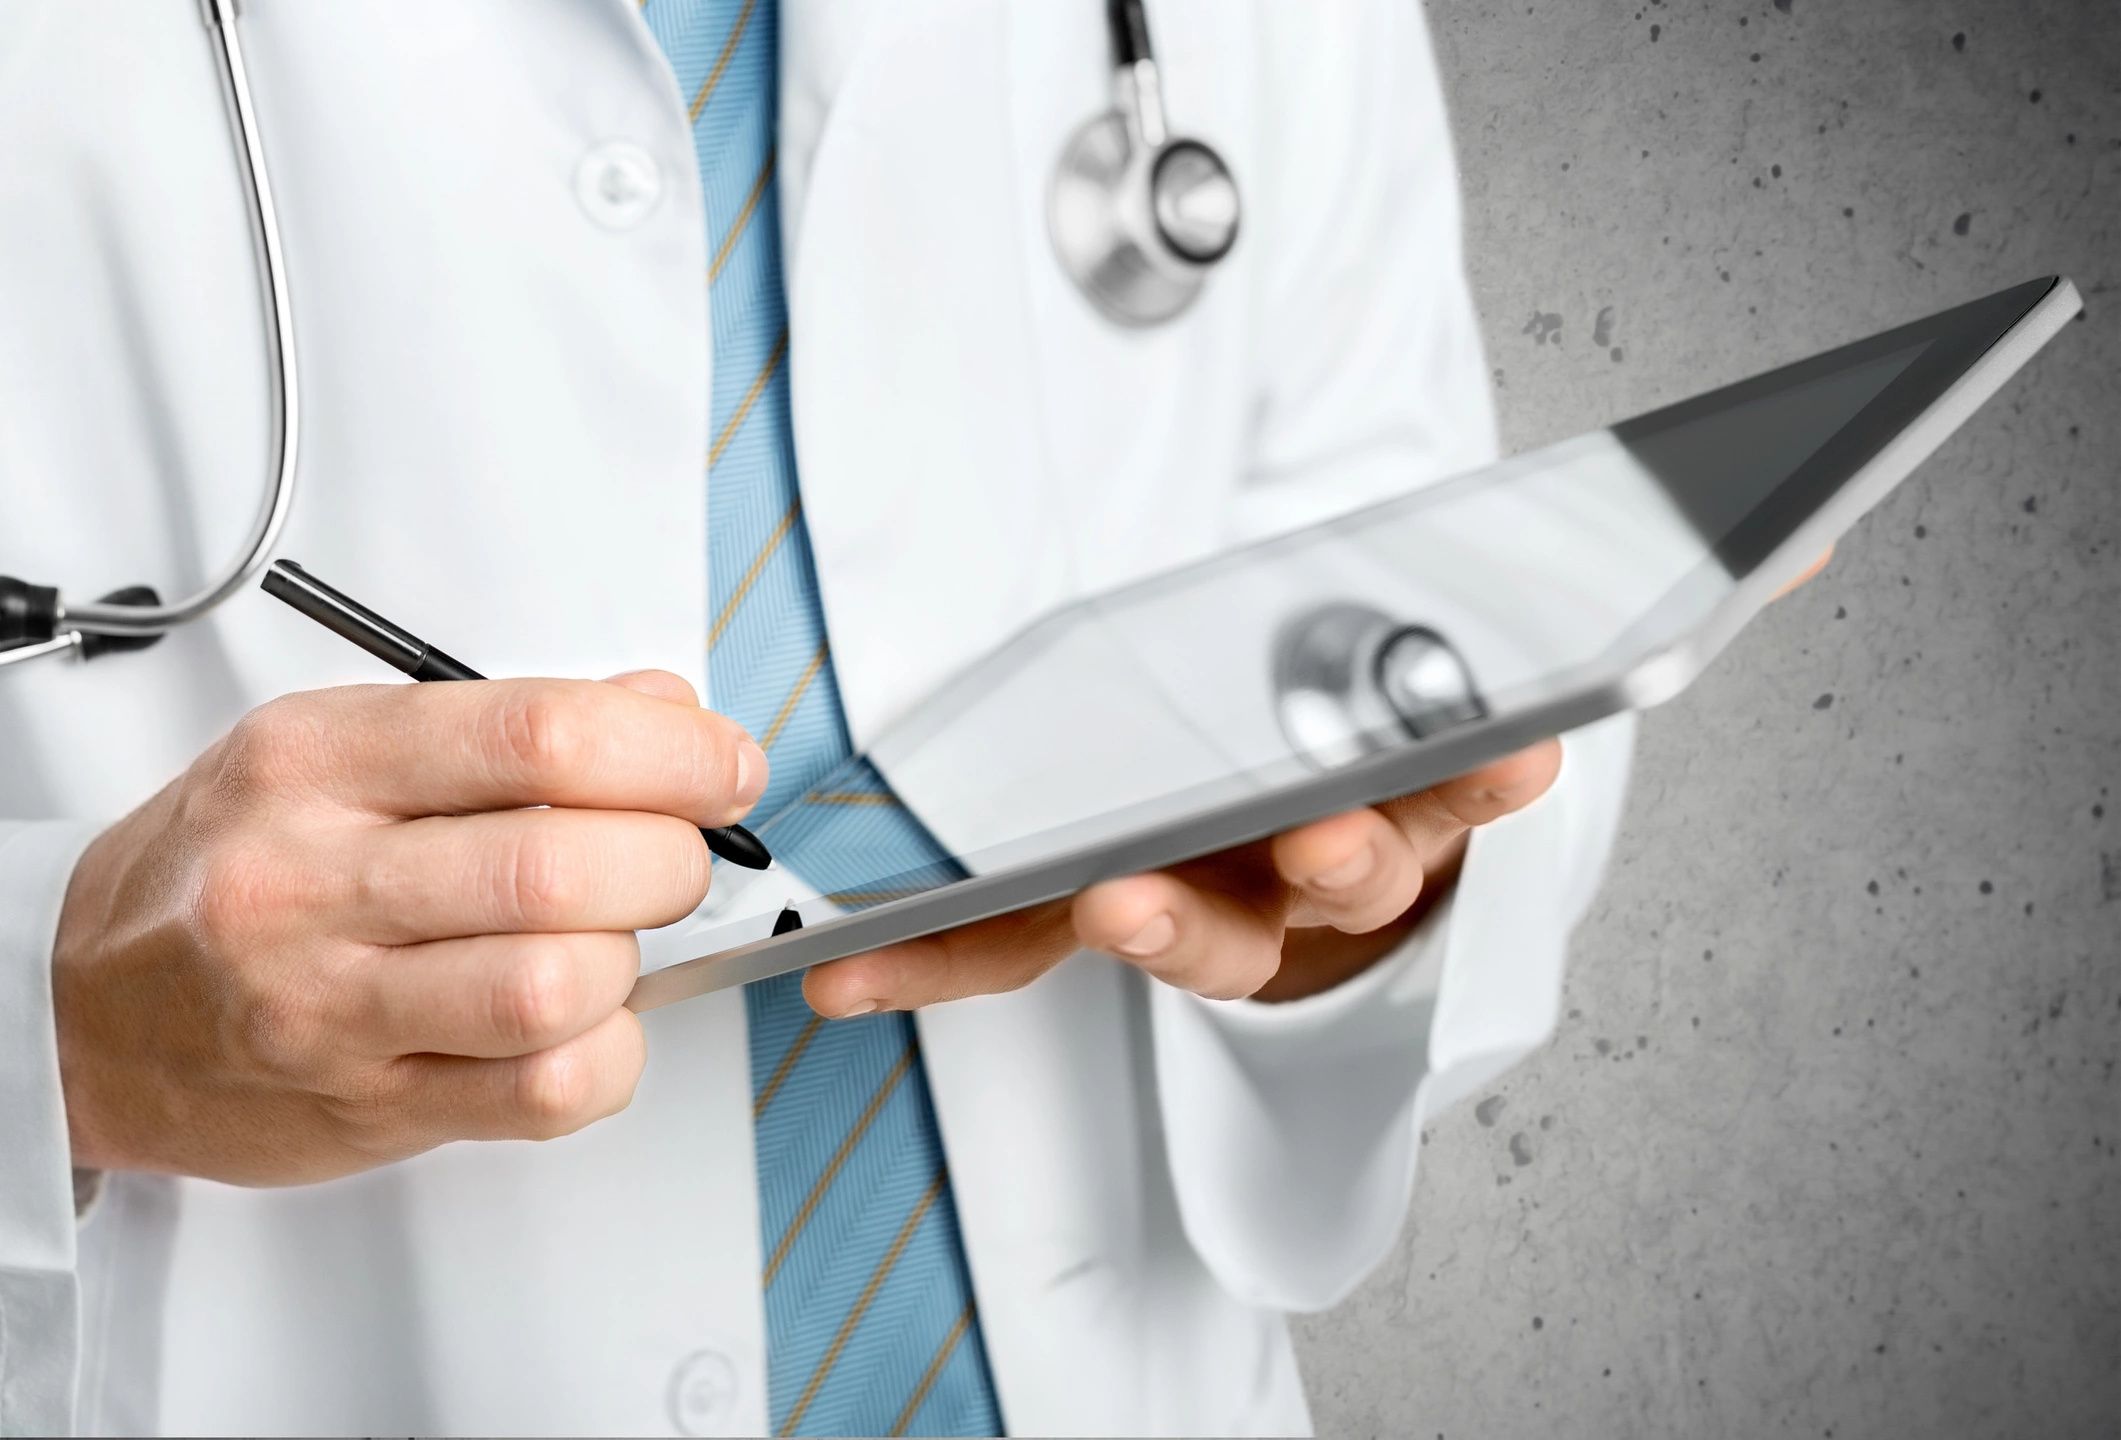 Doctor holds a tablet and writes on it with a stylus